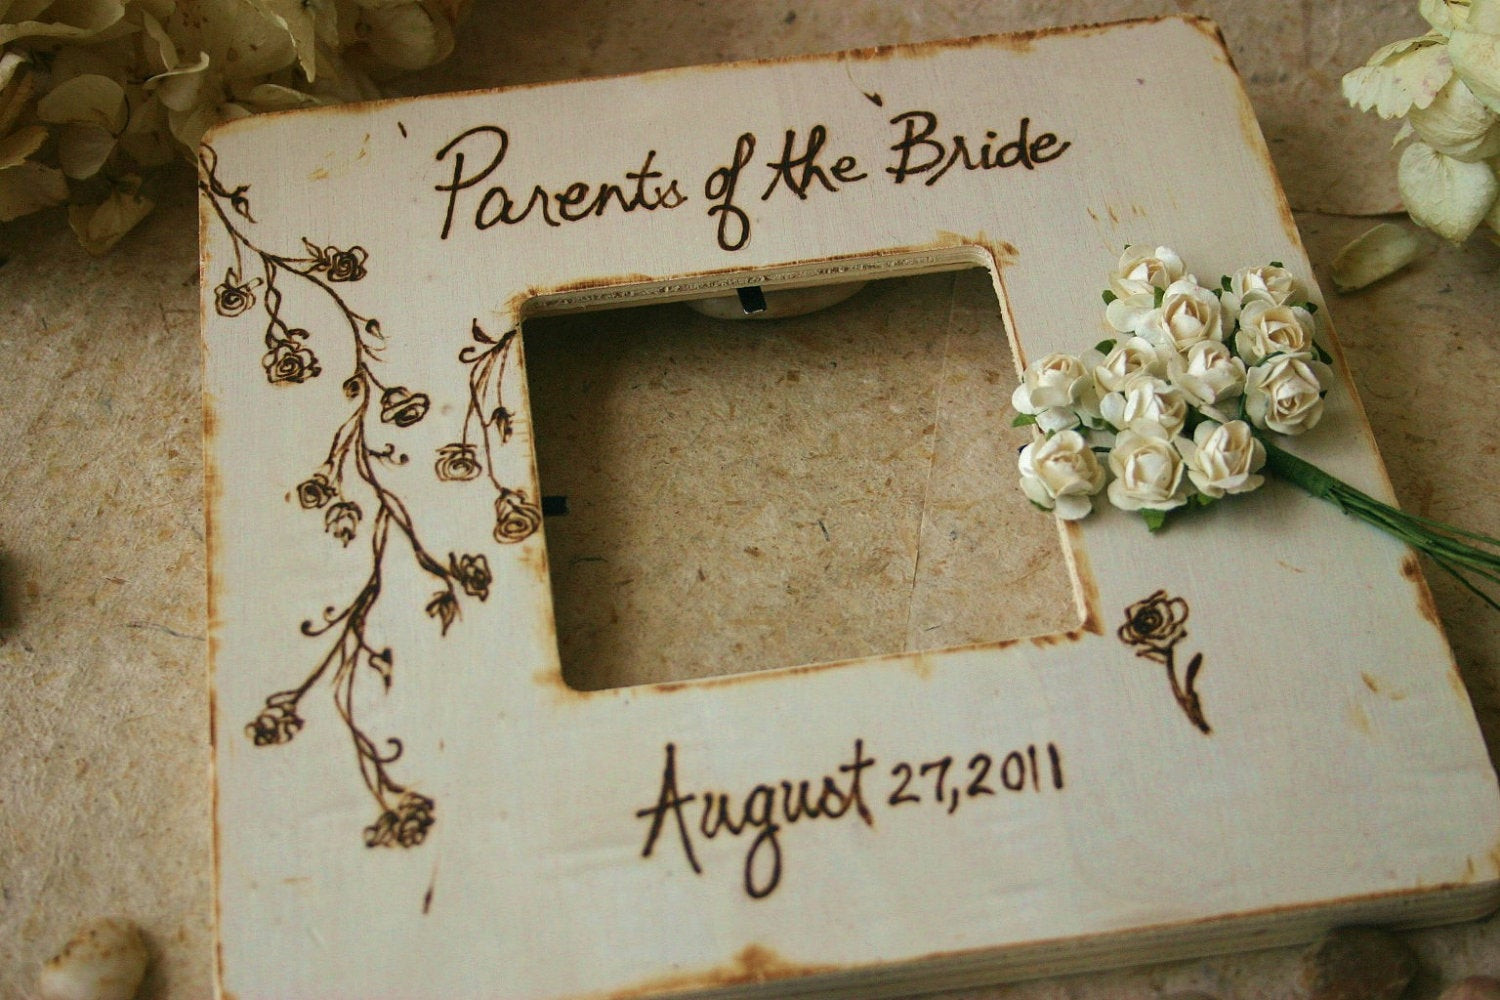 Parents Wedding Gift Ideas From Bride And Groom
 Wedding Gifts for Parents of Bride and Groom Set by